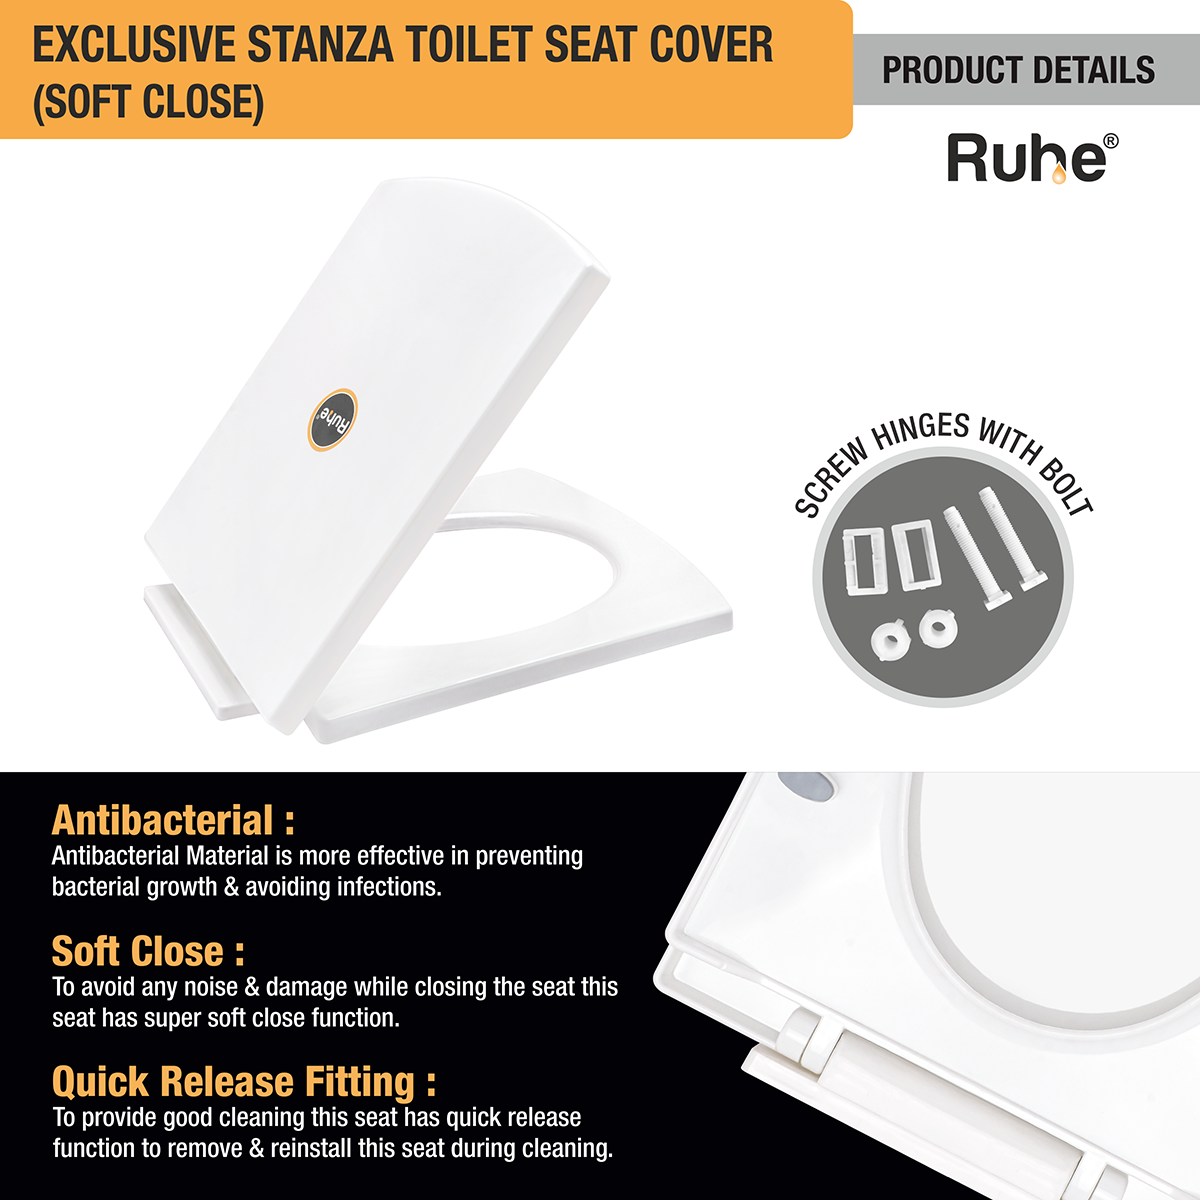 Exclusive Stanza Toilet Seat Cover (Soft Close) product details